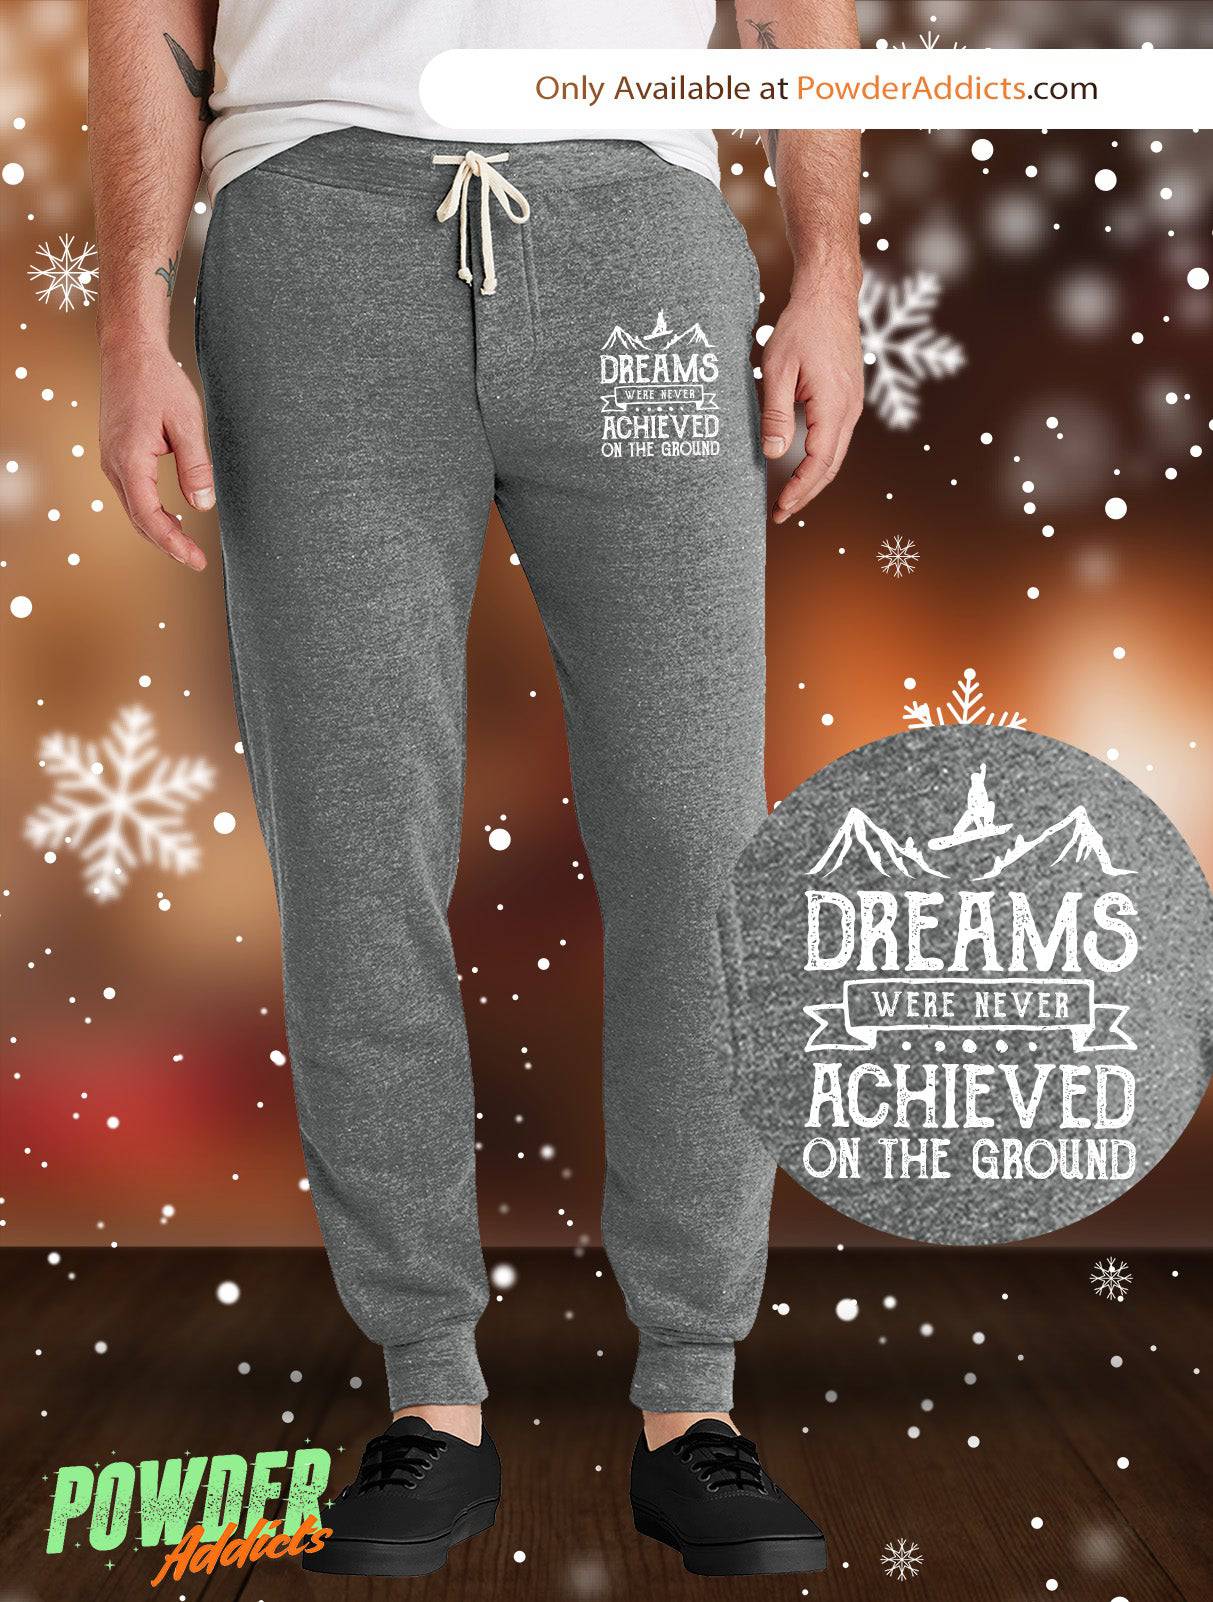 Dreams were Never Achieved on the Ground Men's Adult Fleece Joggers - Powderaddicts